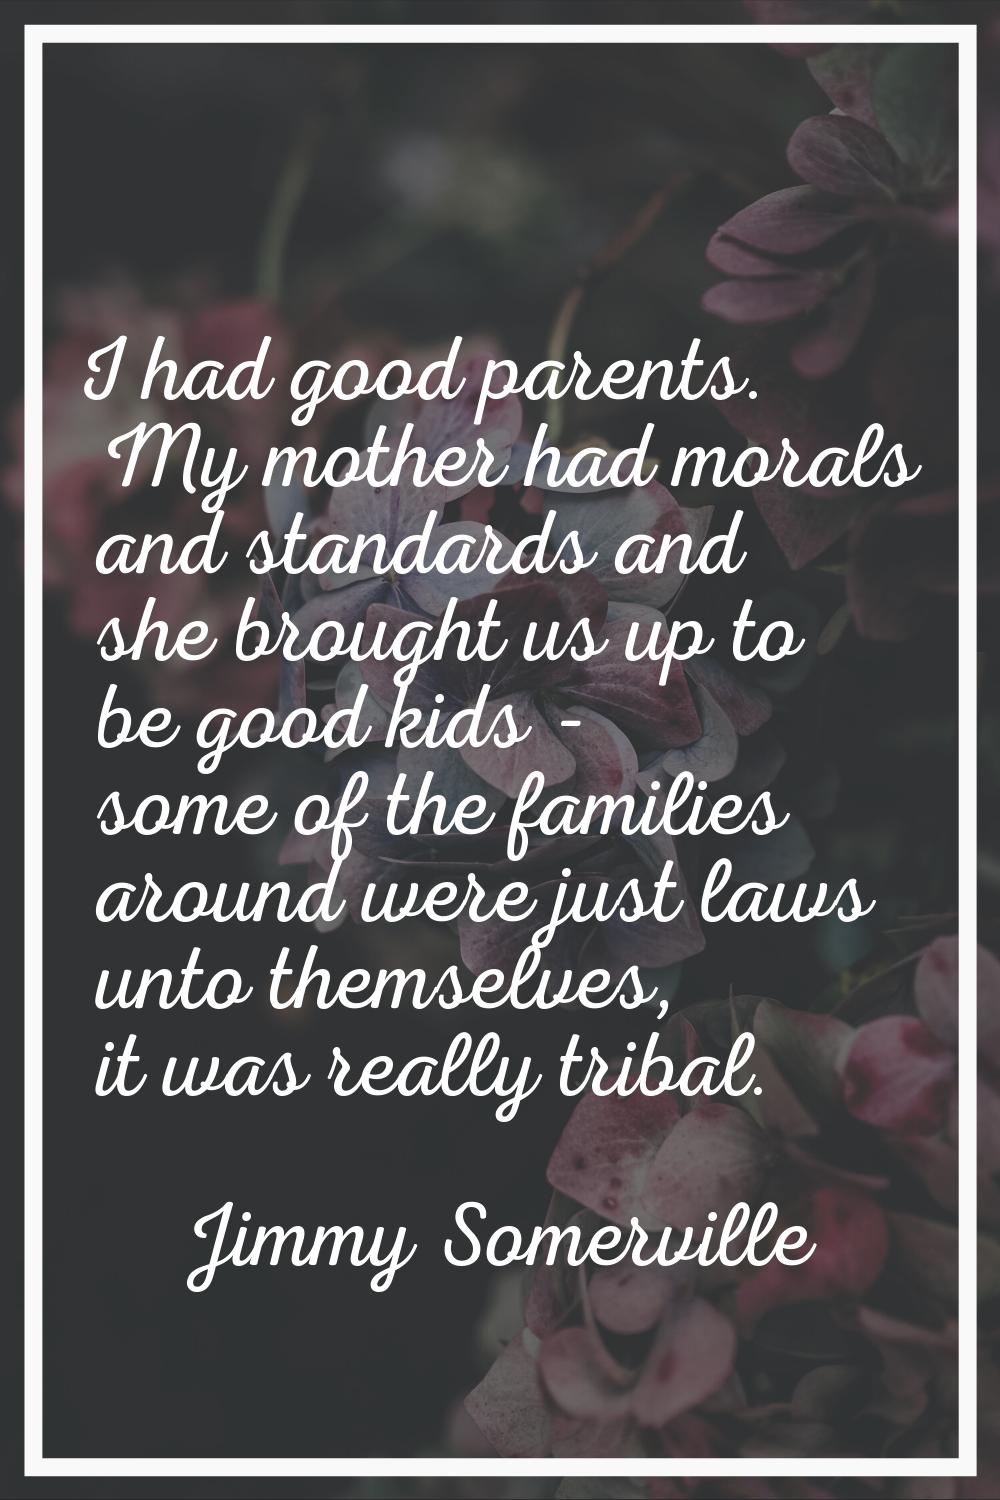 I had good parents. My mother had morals and standards and she brought us up to be good kids - some